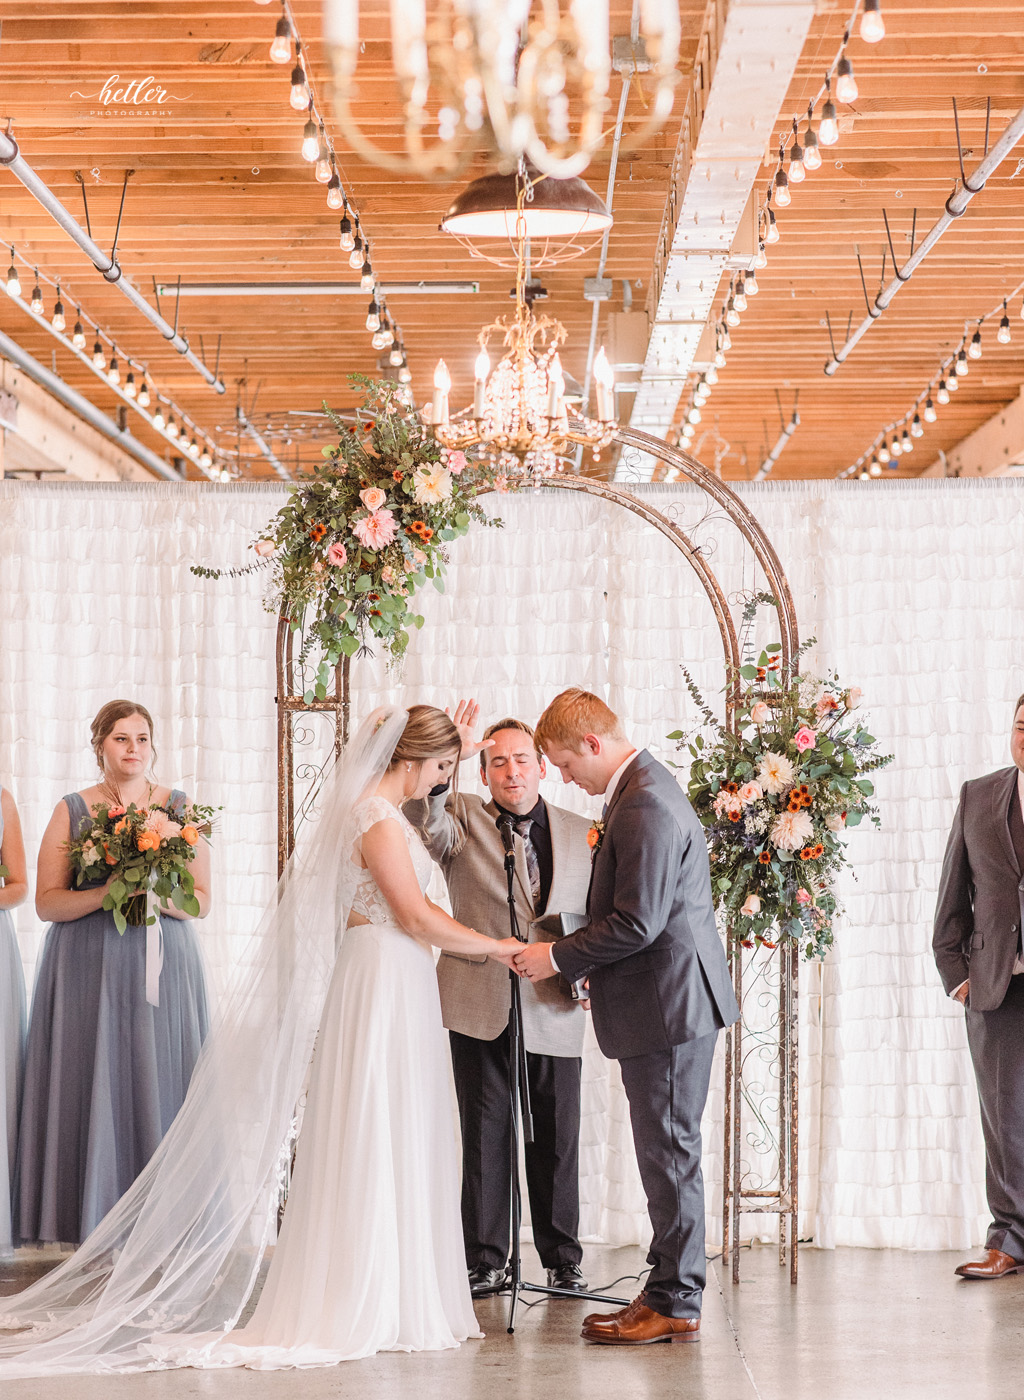 Downtown Grand Rapids Michigan fall warehouse wedding at The Cheney Place